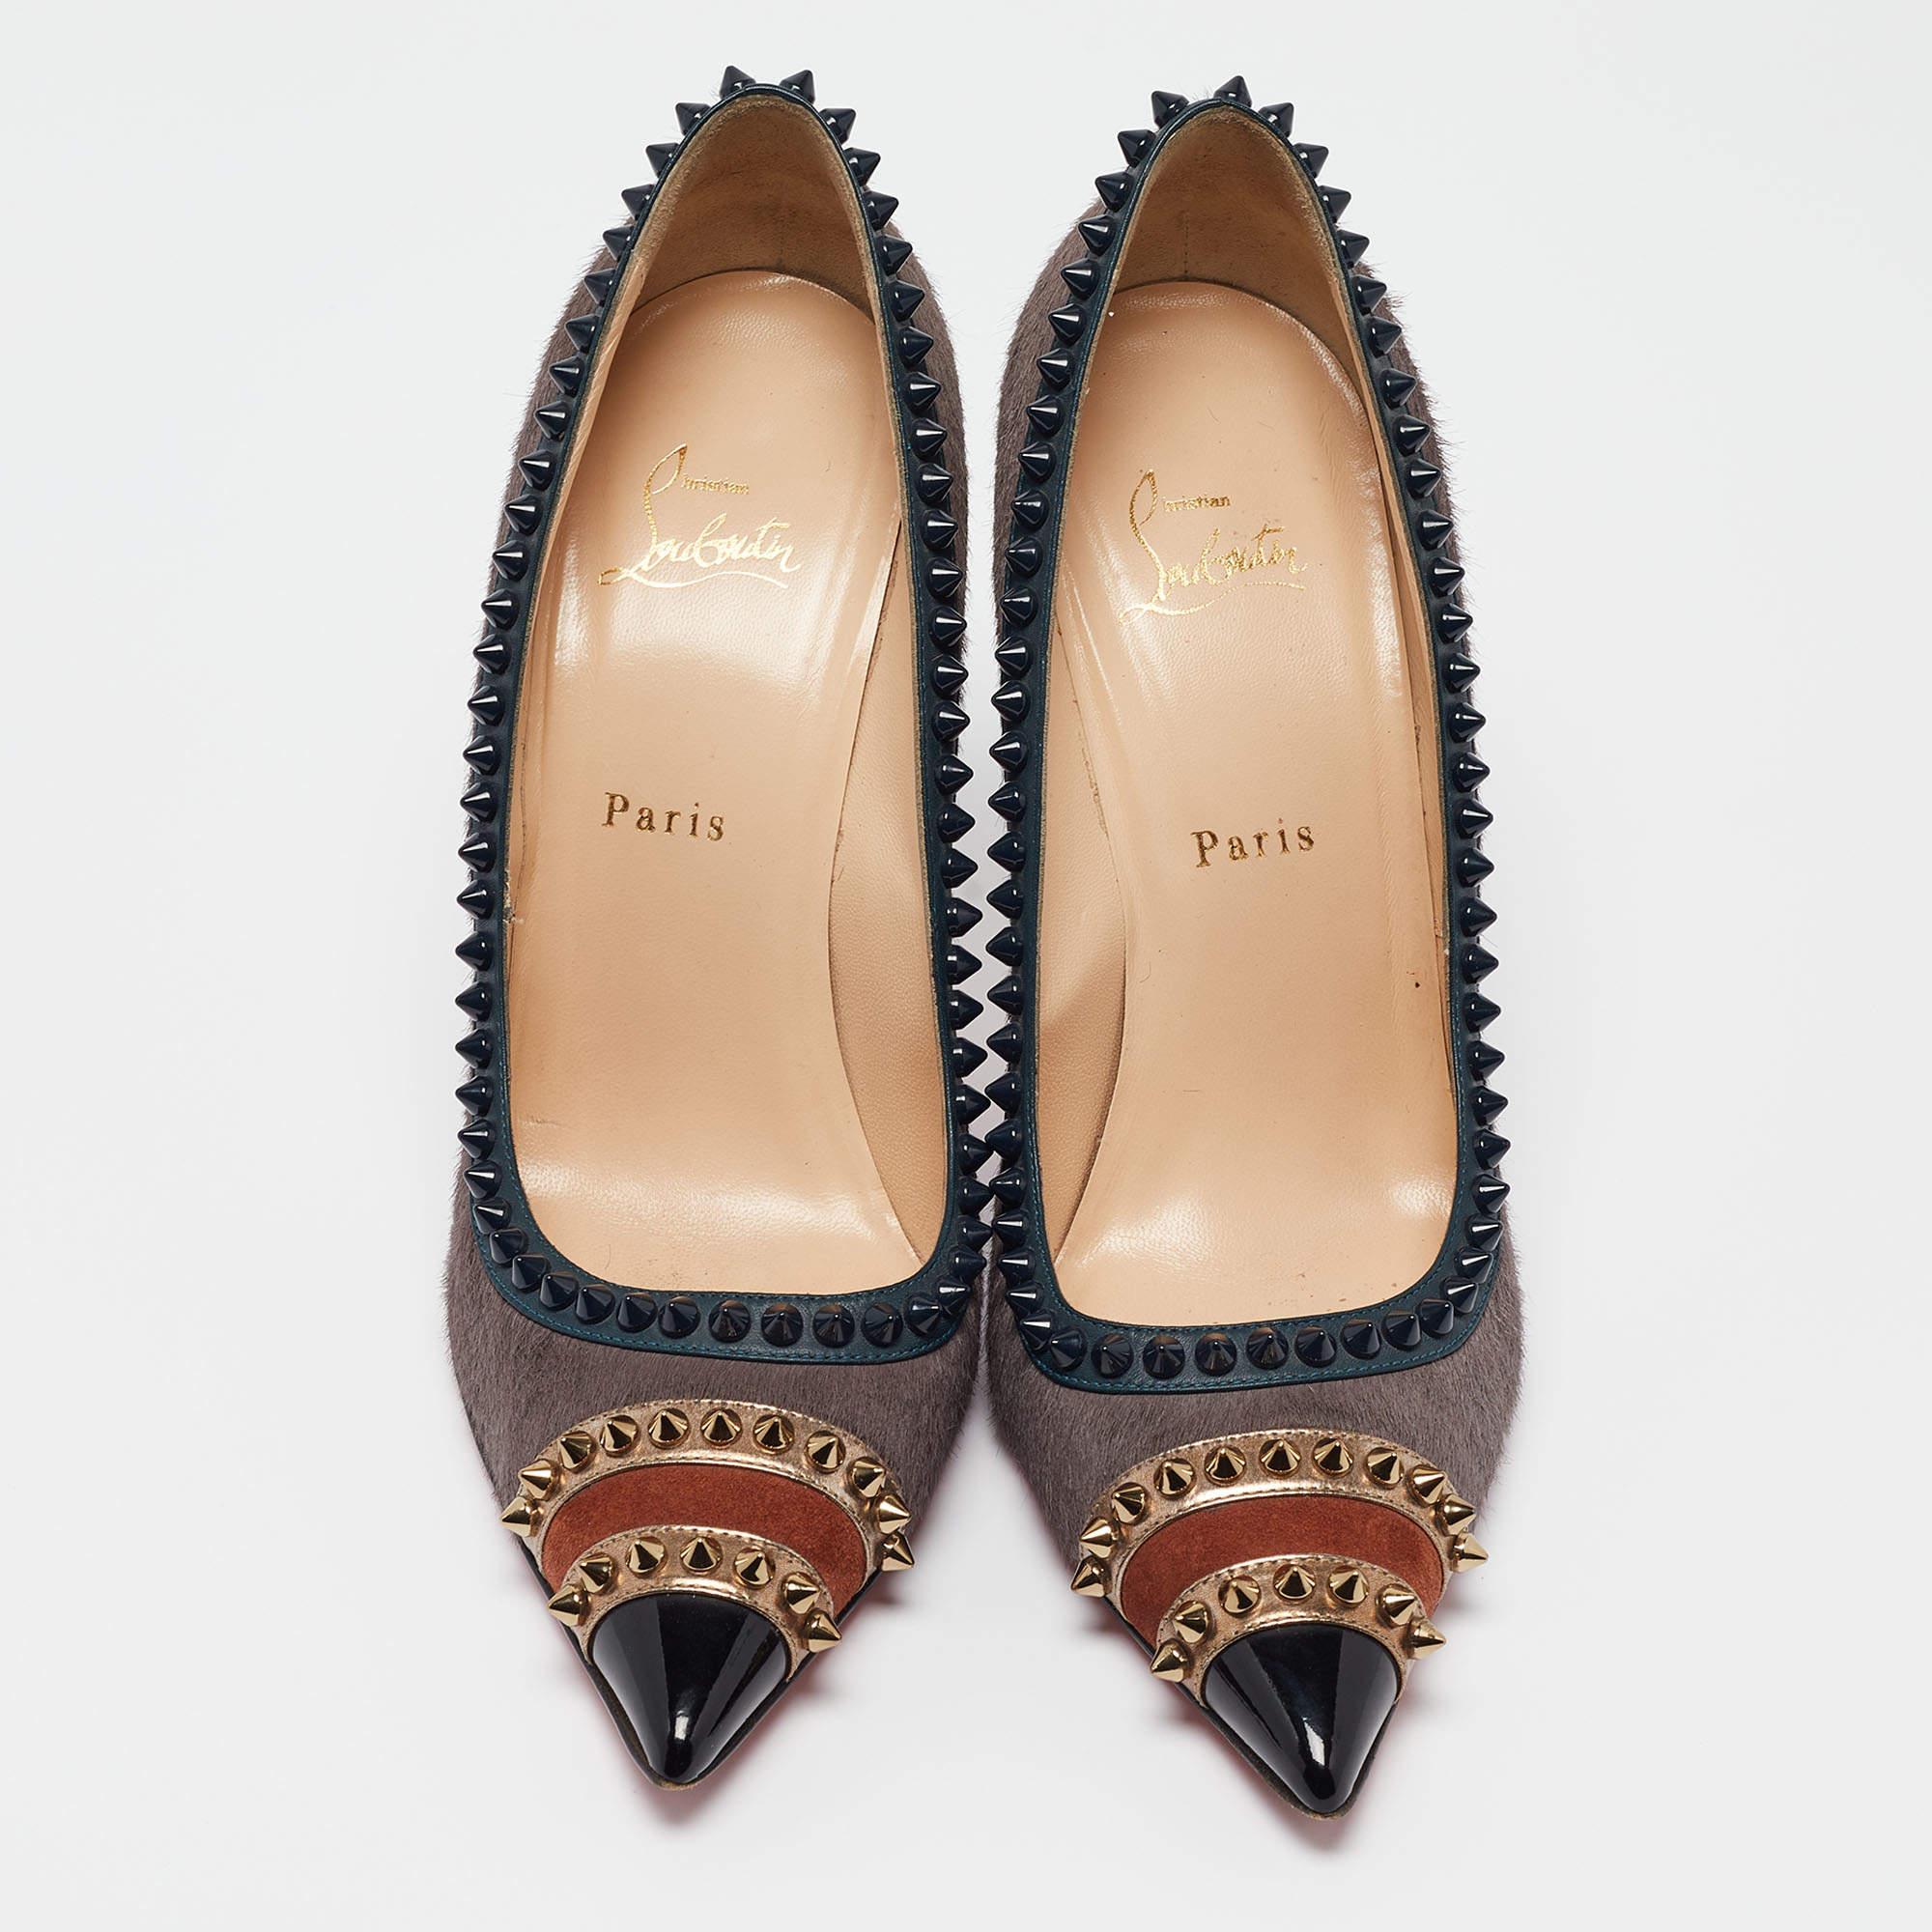 Complement your well-put-together outfit with these authentic Christian Louboutin shoes. Timeless and classy, they have an amazing construction for enduring quality and comfortable fit.

